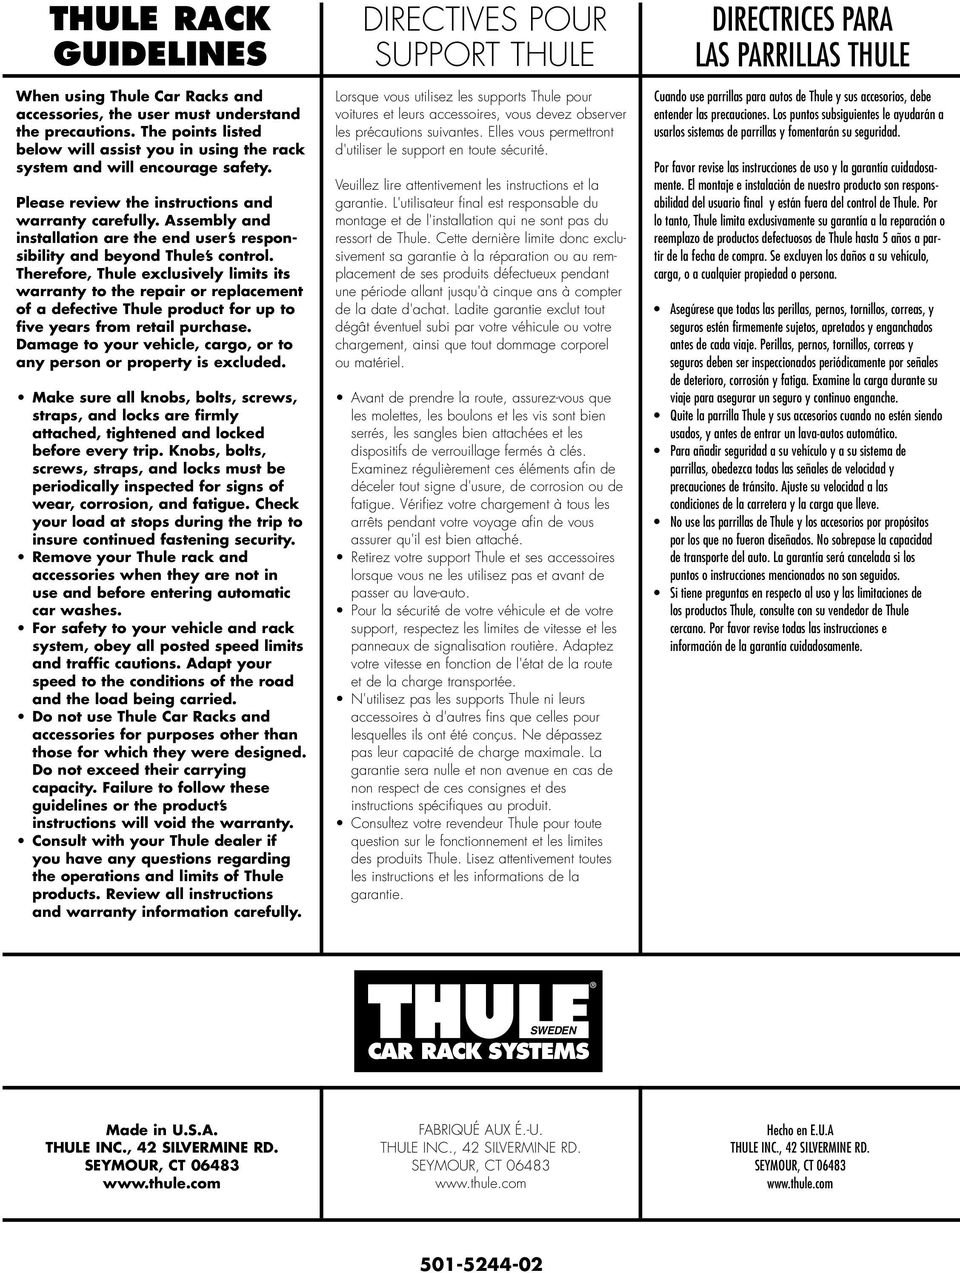 Therefore, Thule exclusively limits its warranty to the repair or replacement of a defective Thule product for up to five years from retail purchase.